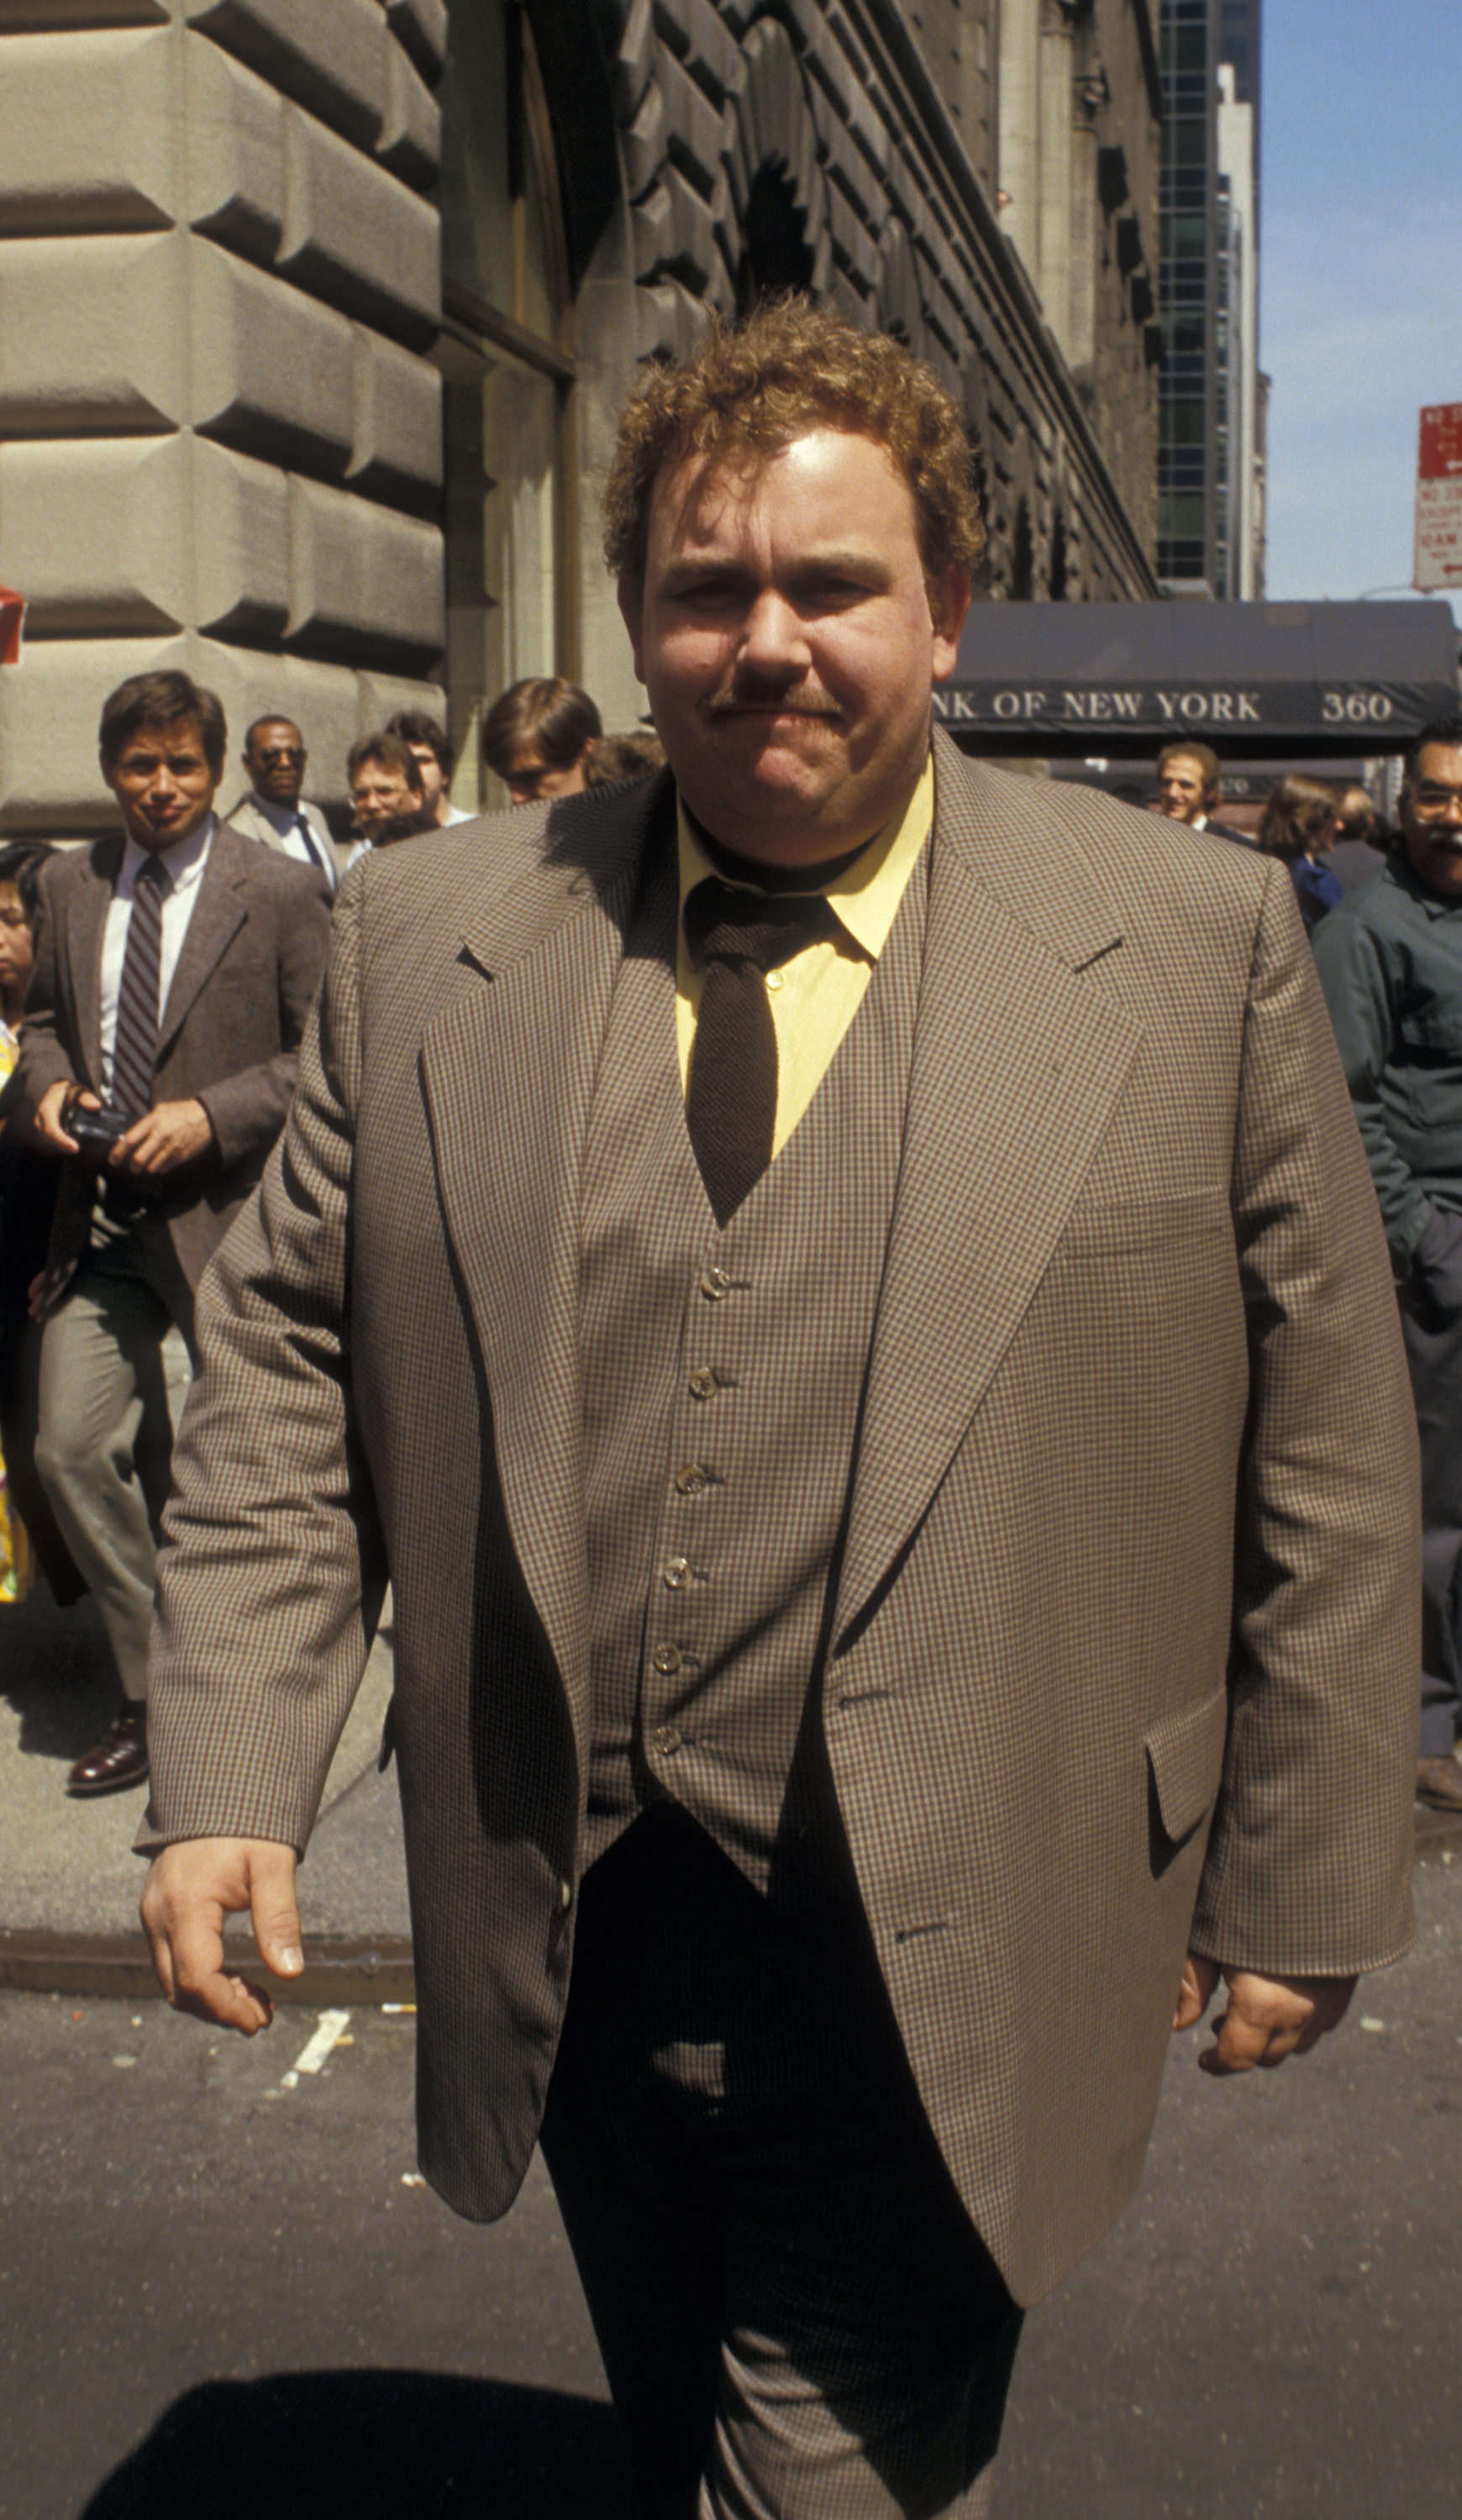 John Candy on set, circa 1987 | Source: Getty Images